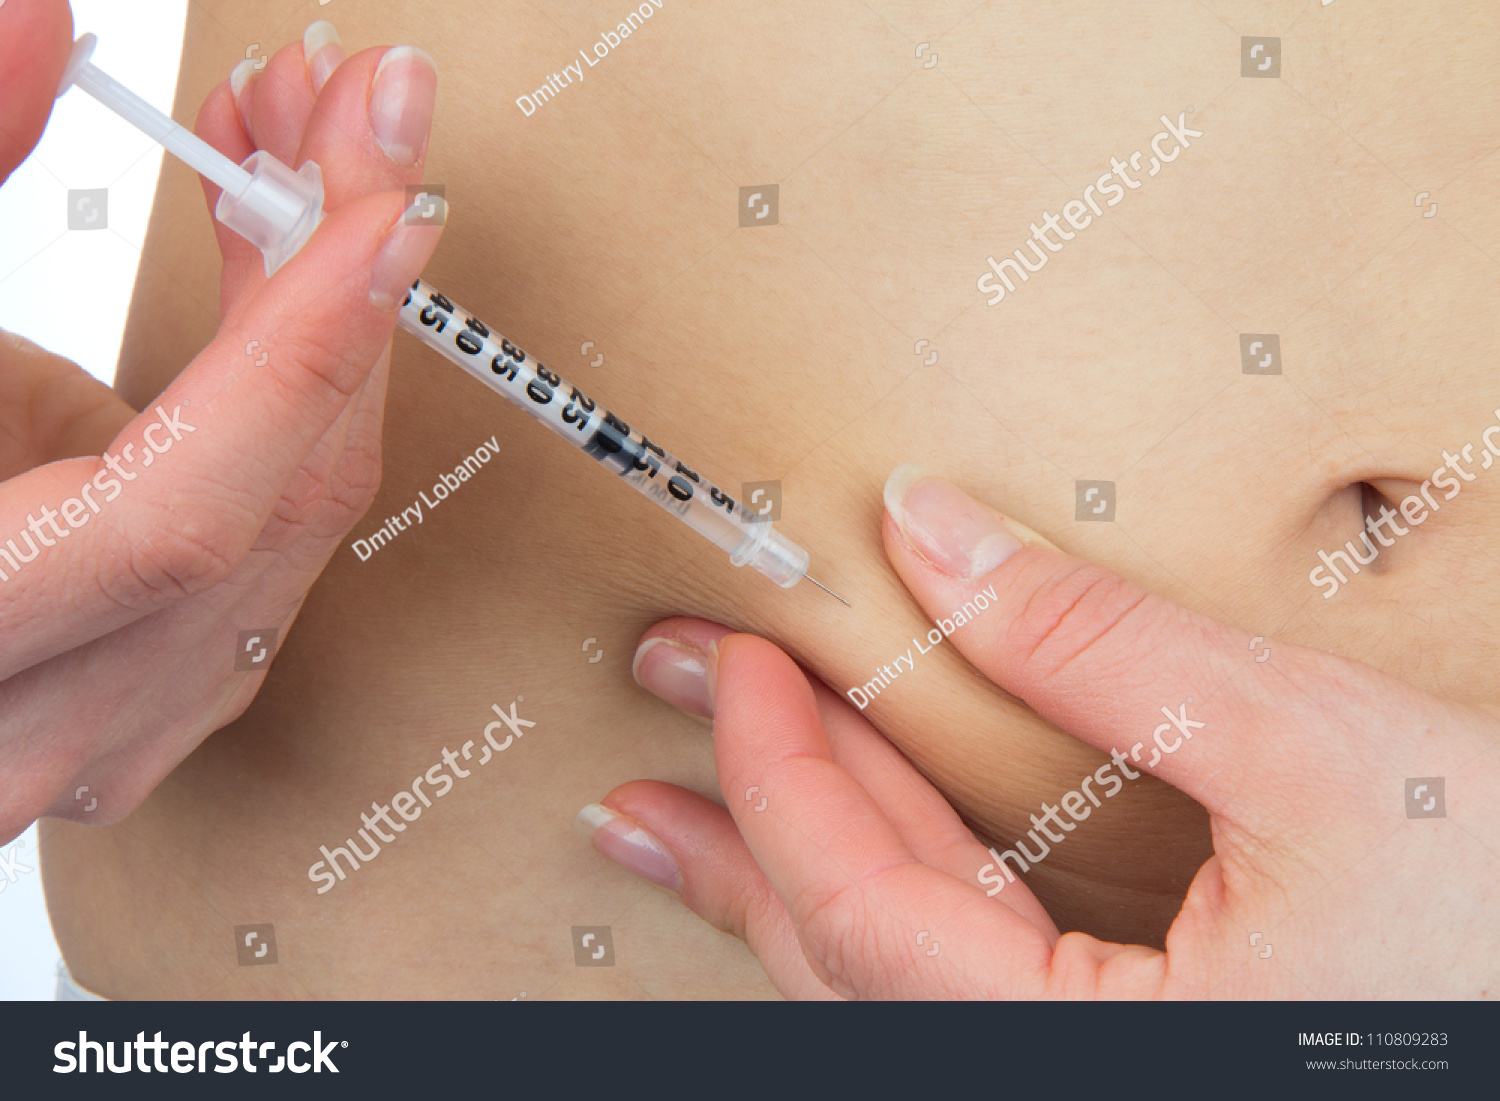 Insulin Diabetes patient make a subcutaneous injection by single use syringe with needle and Rapid-acting humalog insulin into abdomen by doctor prescription isolated on a white background